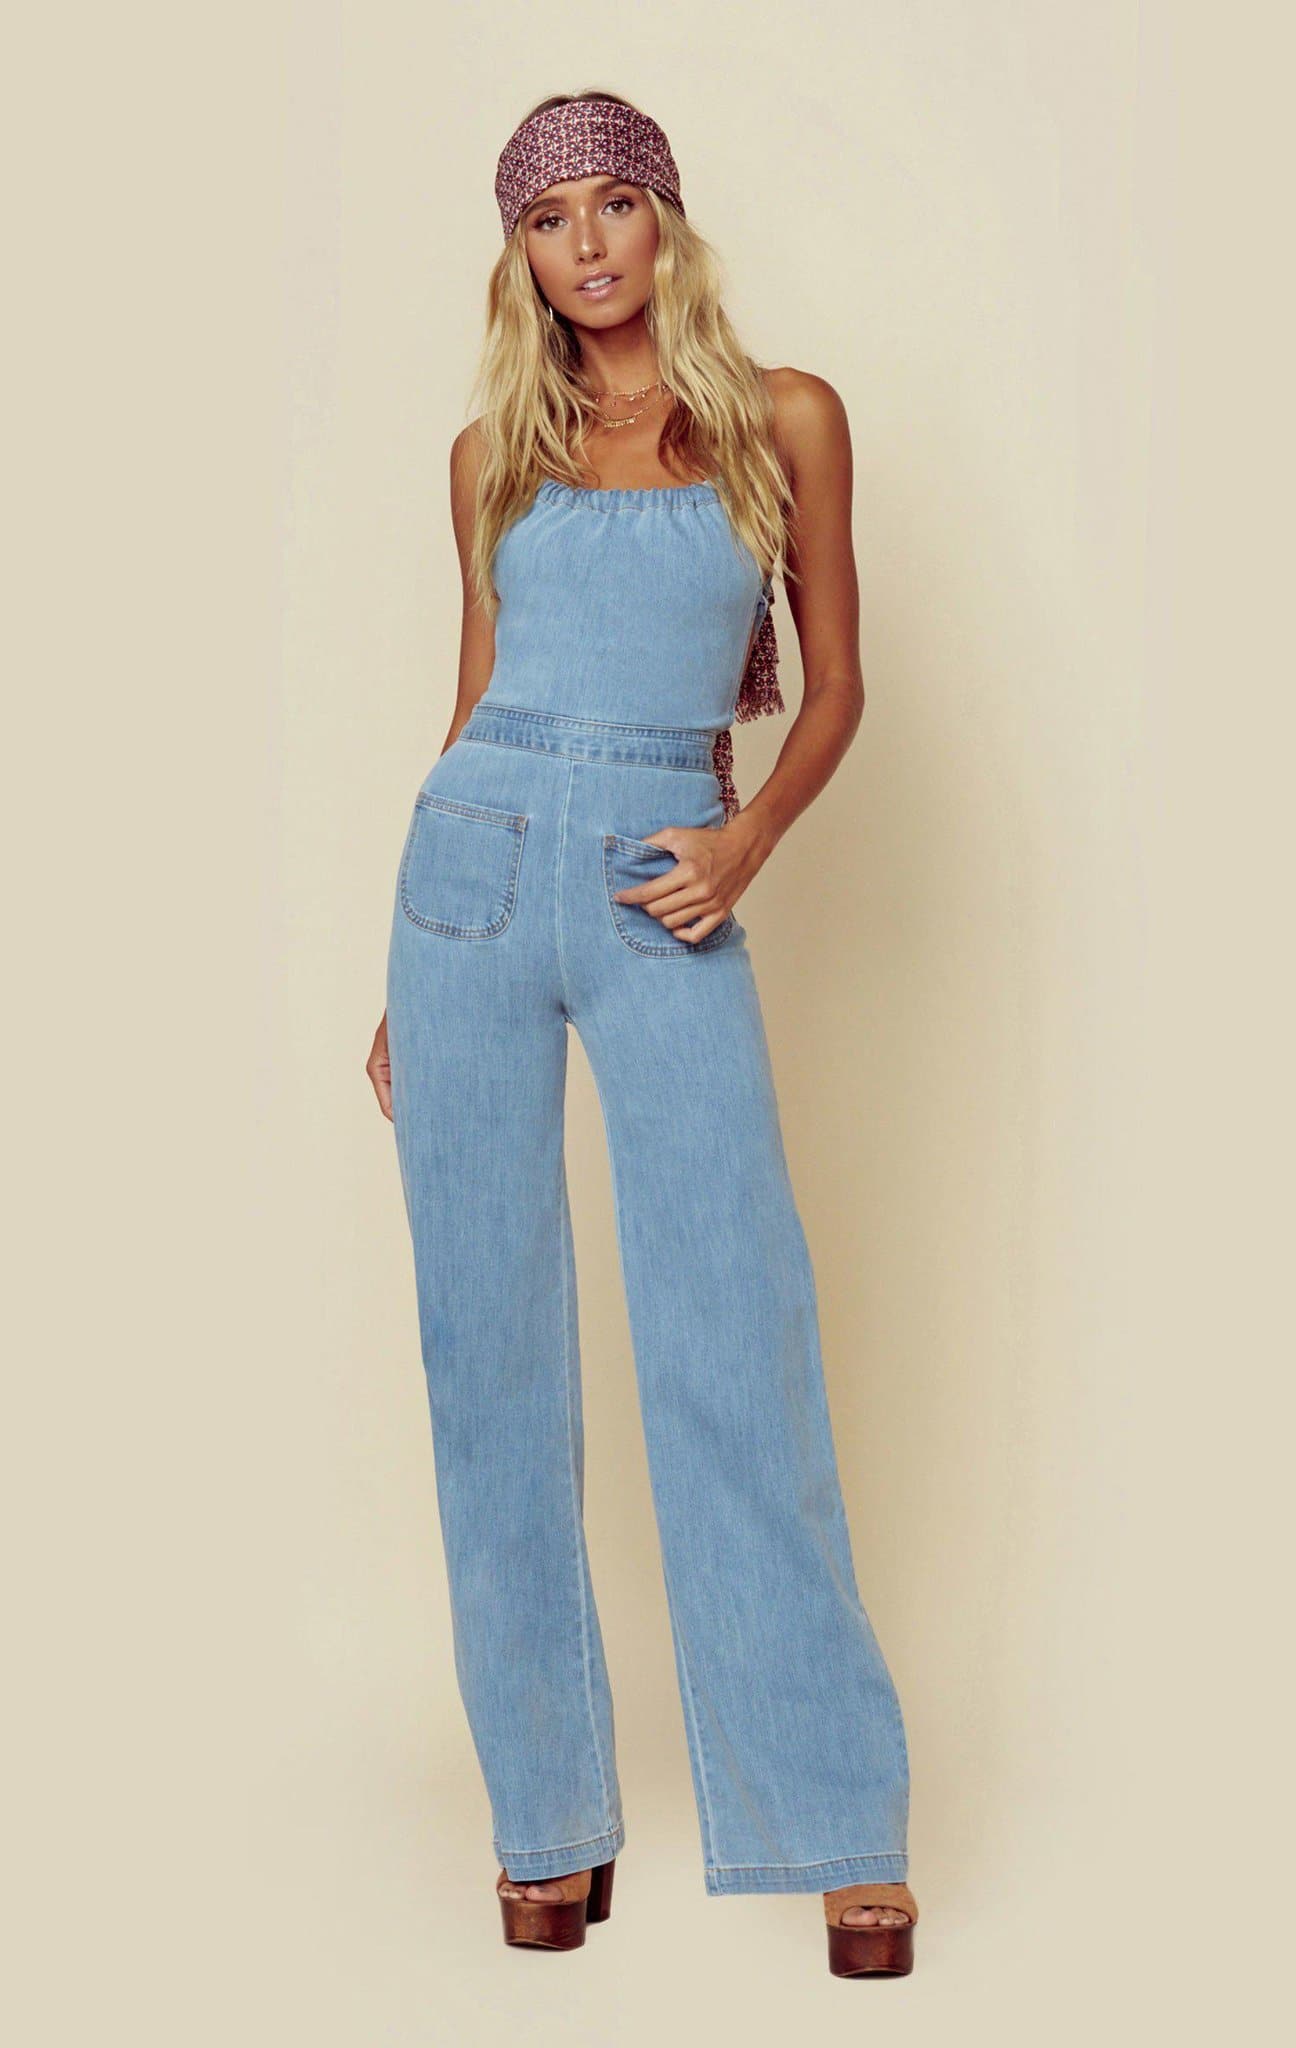 STONED IMMACULATE JEAN GENIE JUMPSUIT - FLMR